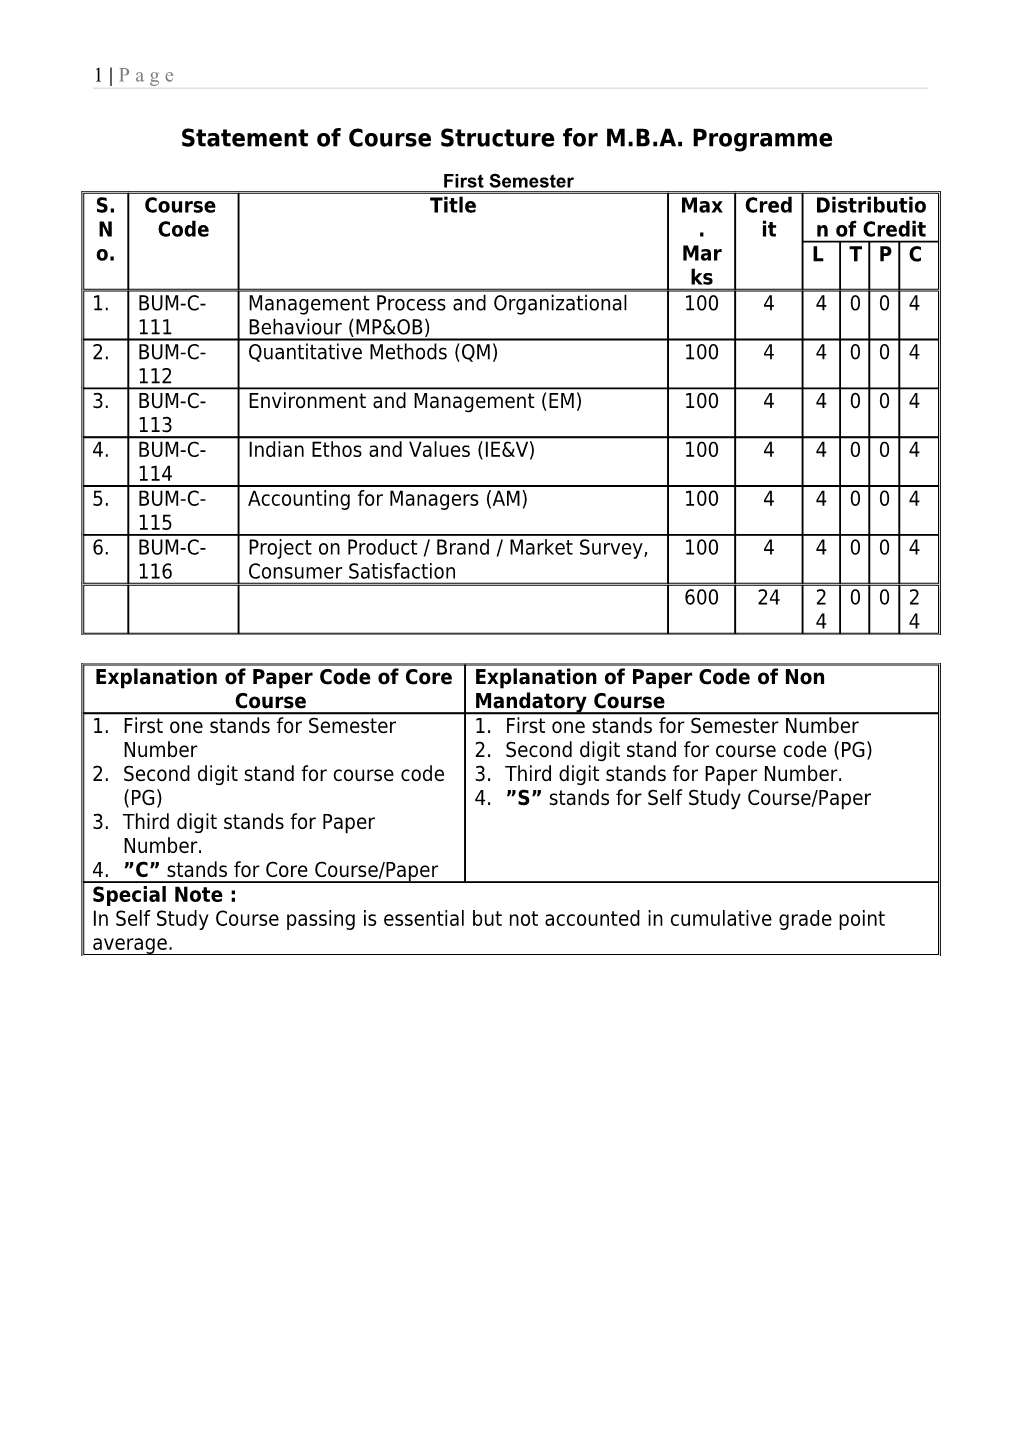 Statement of Course Structure for M.B.A. Programme